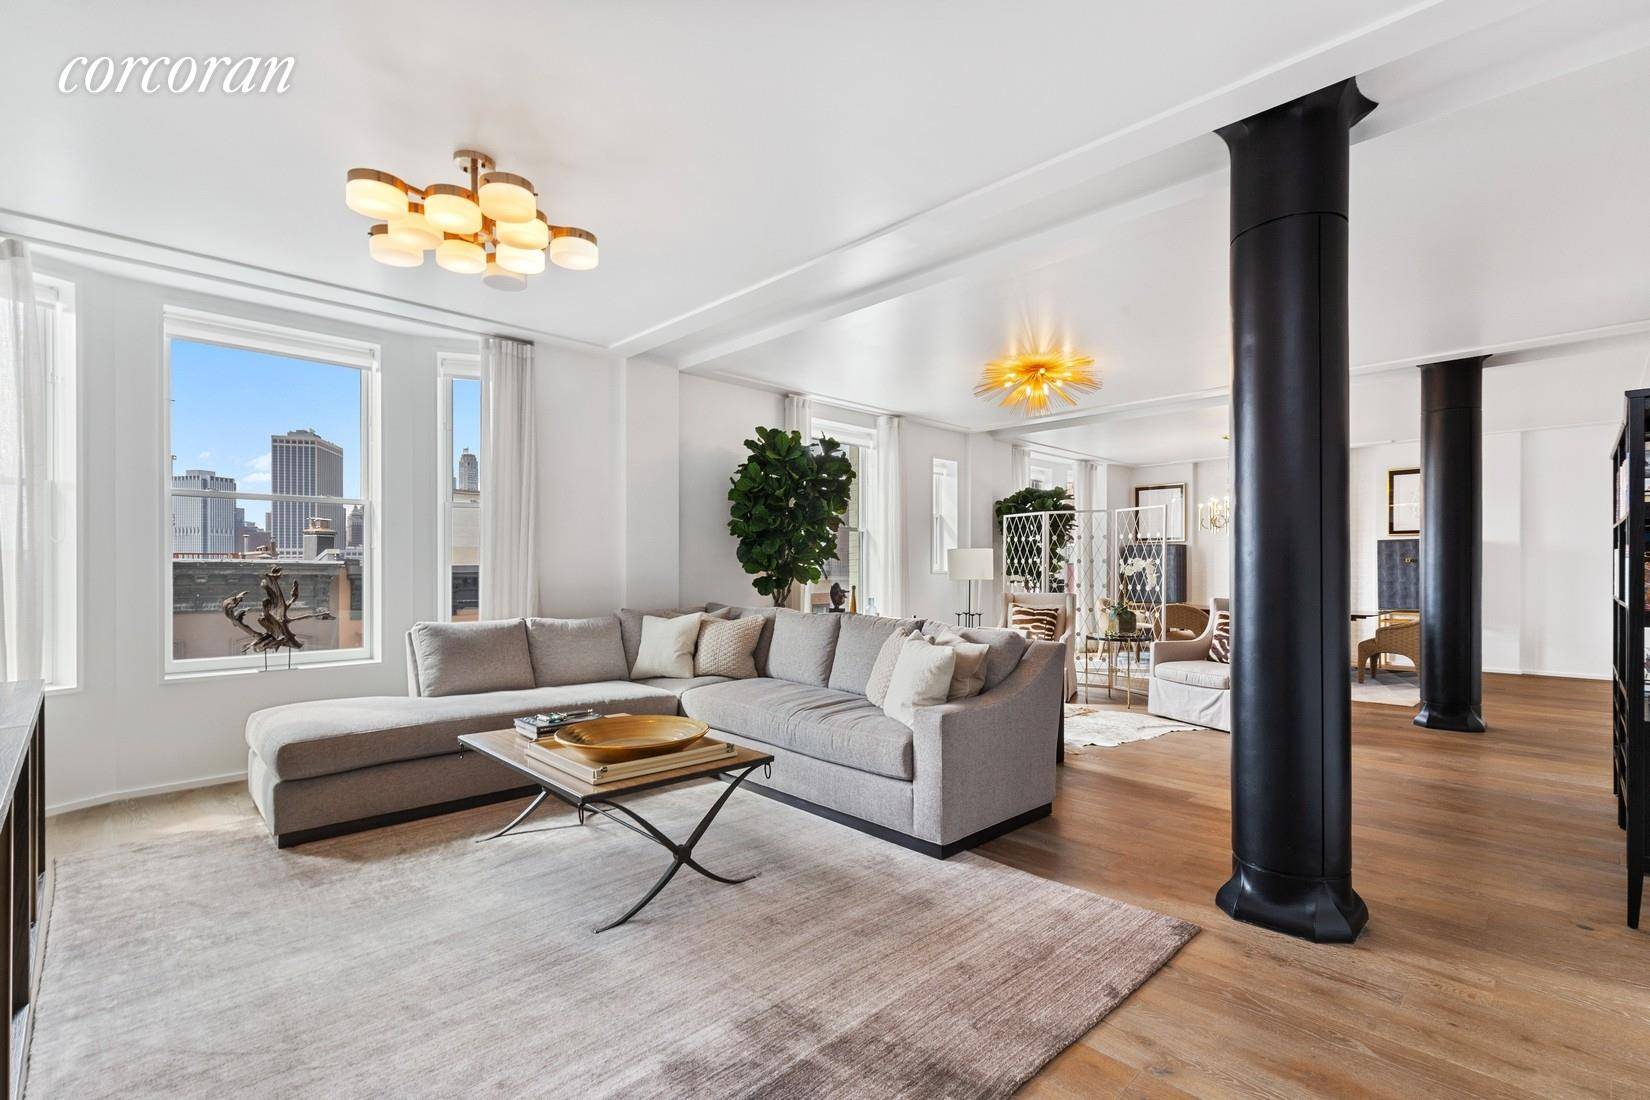 The Standish located at 171 Columbia Heights Resides on a picturesque Townhouse Block, and is uniquely positioned atop the Brooklyn Heights Promenade overlooking all of the Harbor and lower Manhattan.